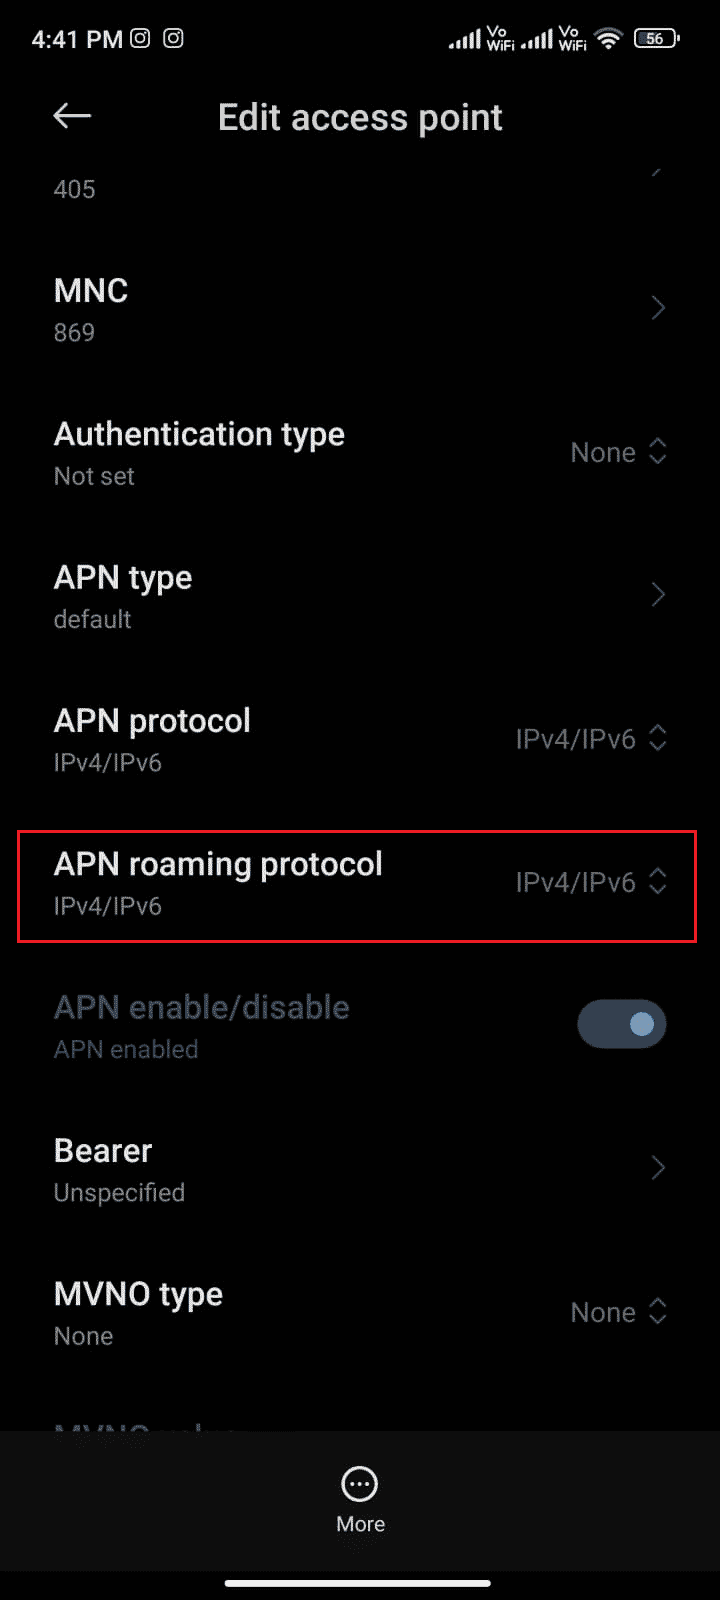 In the Edit access point menu, swipe down and tap on APN roaming protocol